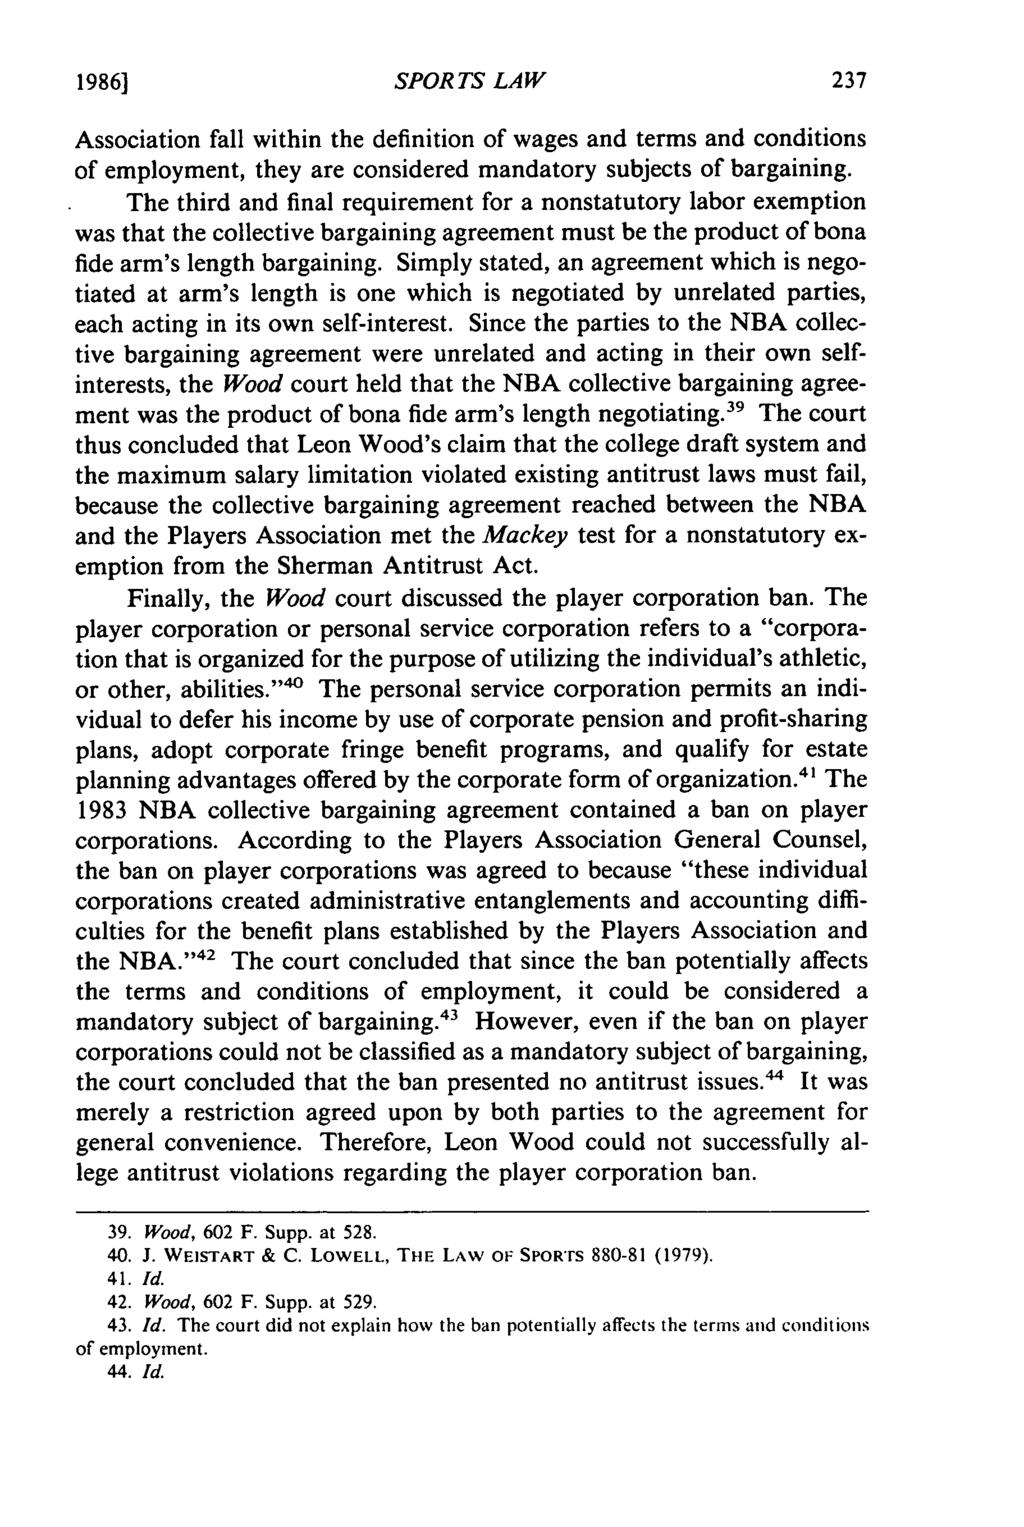 1986] SPORTS LAW Association fall within the definition of wages and terms and conditions of employment, they are considered mandatory subjects of bargaining.